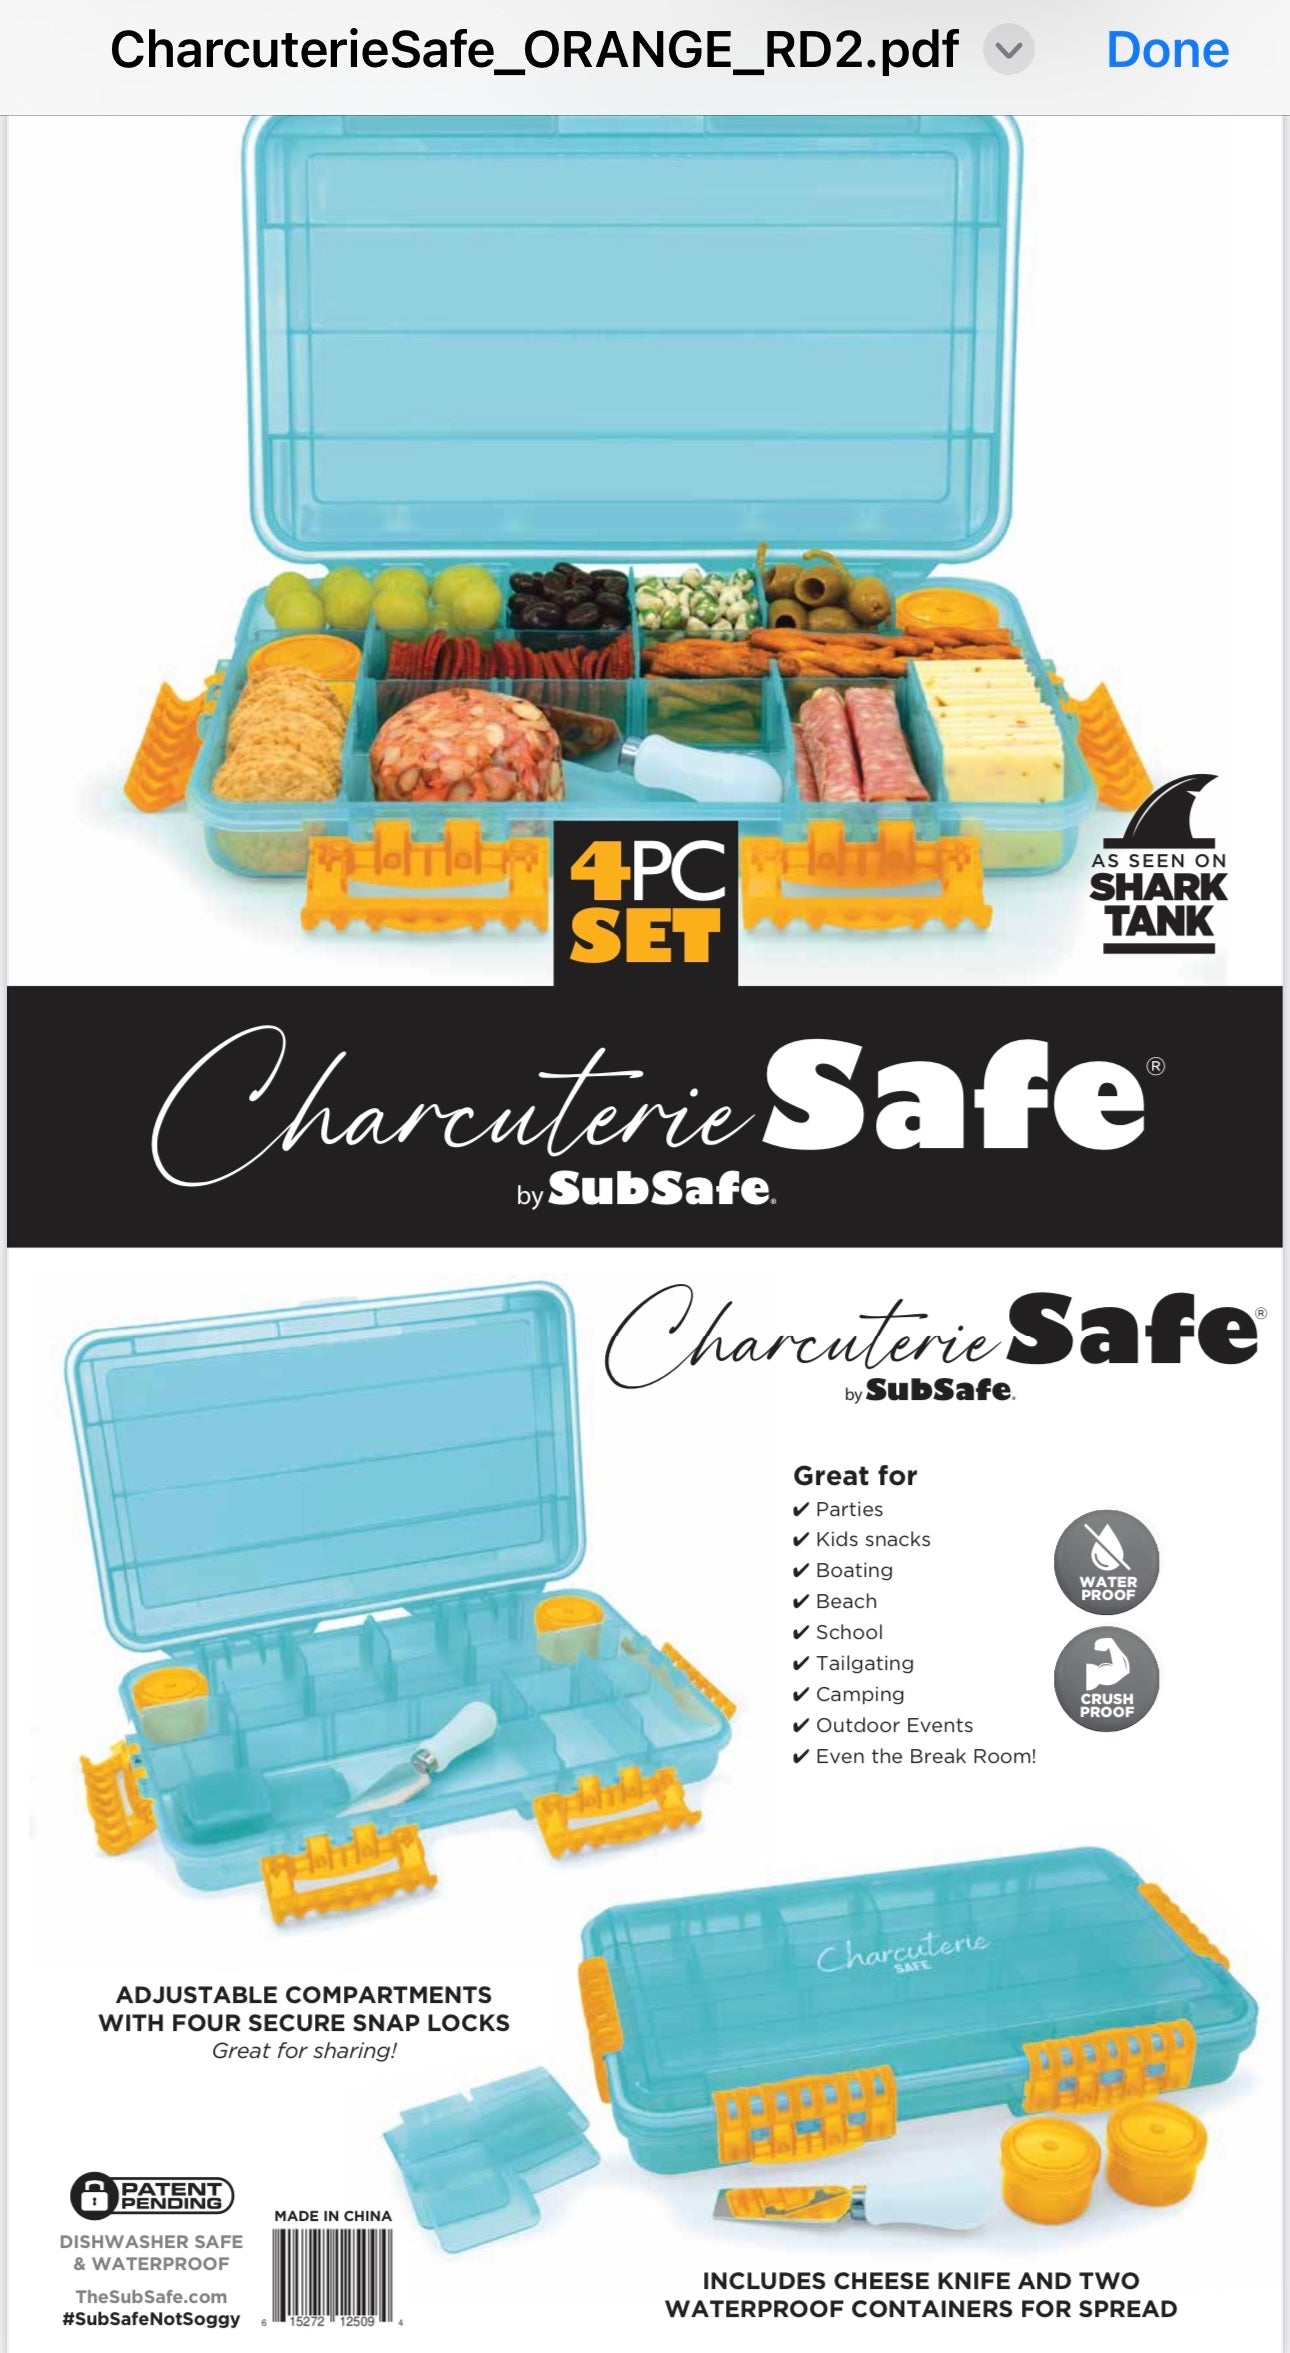 Charcuterie Safe by SubSafe - Waterproof Tackle Box Container